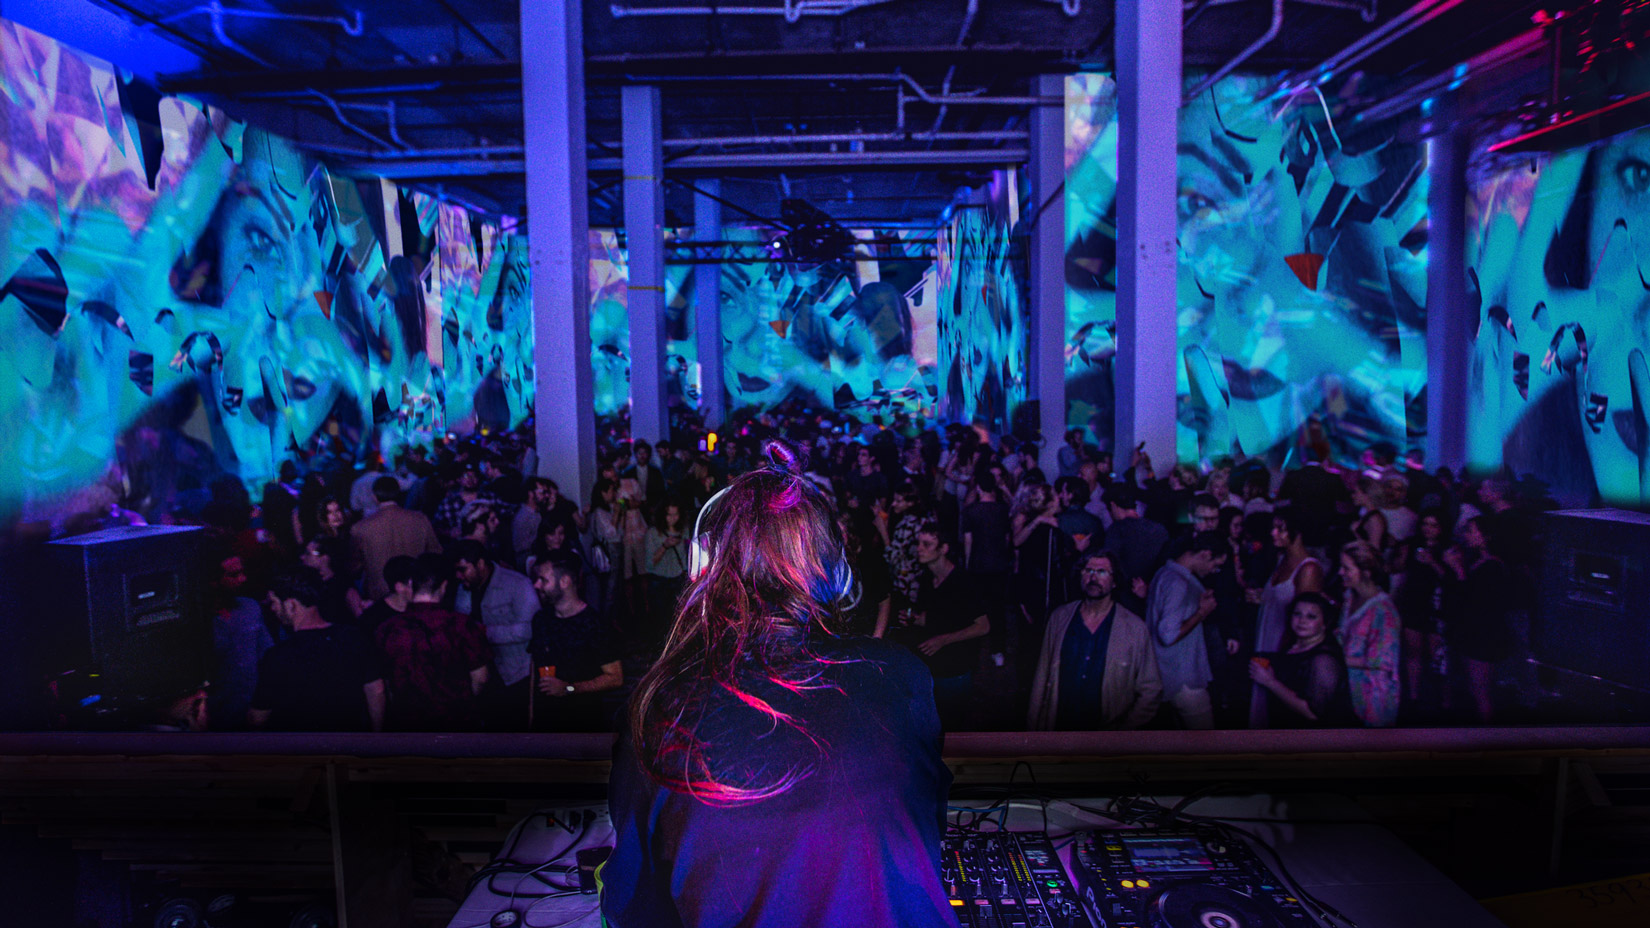 A DJ in front of a crowd of people with projection mapping on all of the walls of people's faces